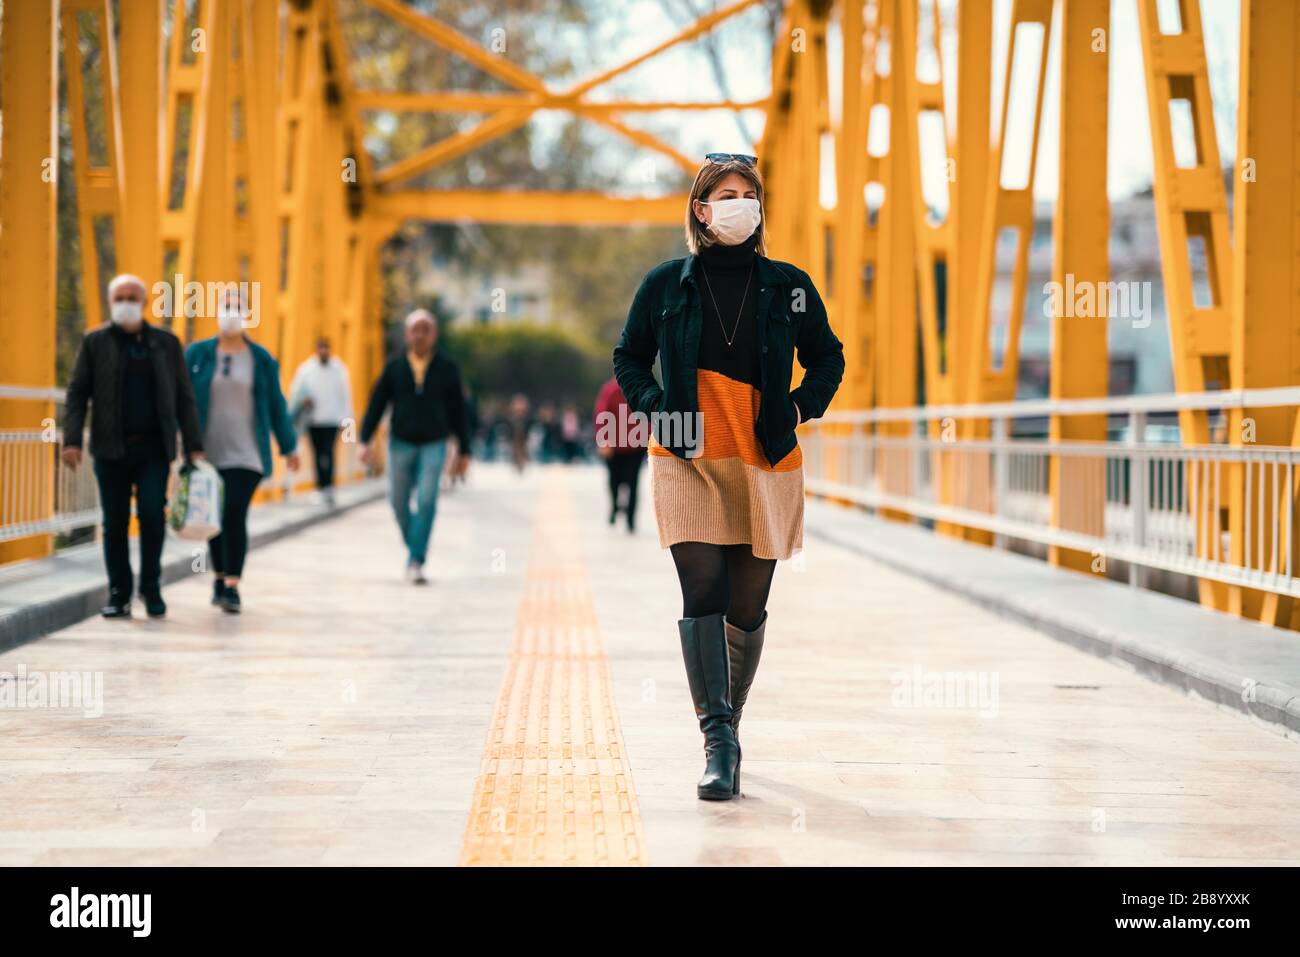 A reckless young Woman walk on crowded street with a mask in a quarantine period because of pandemic global danger Stock Photo